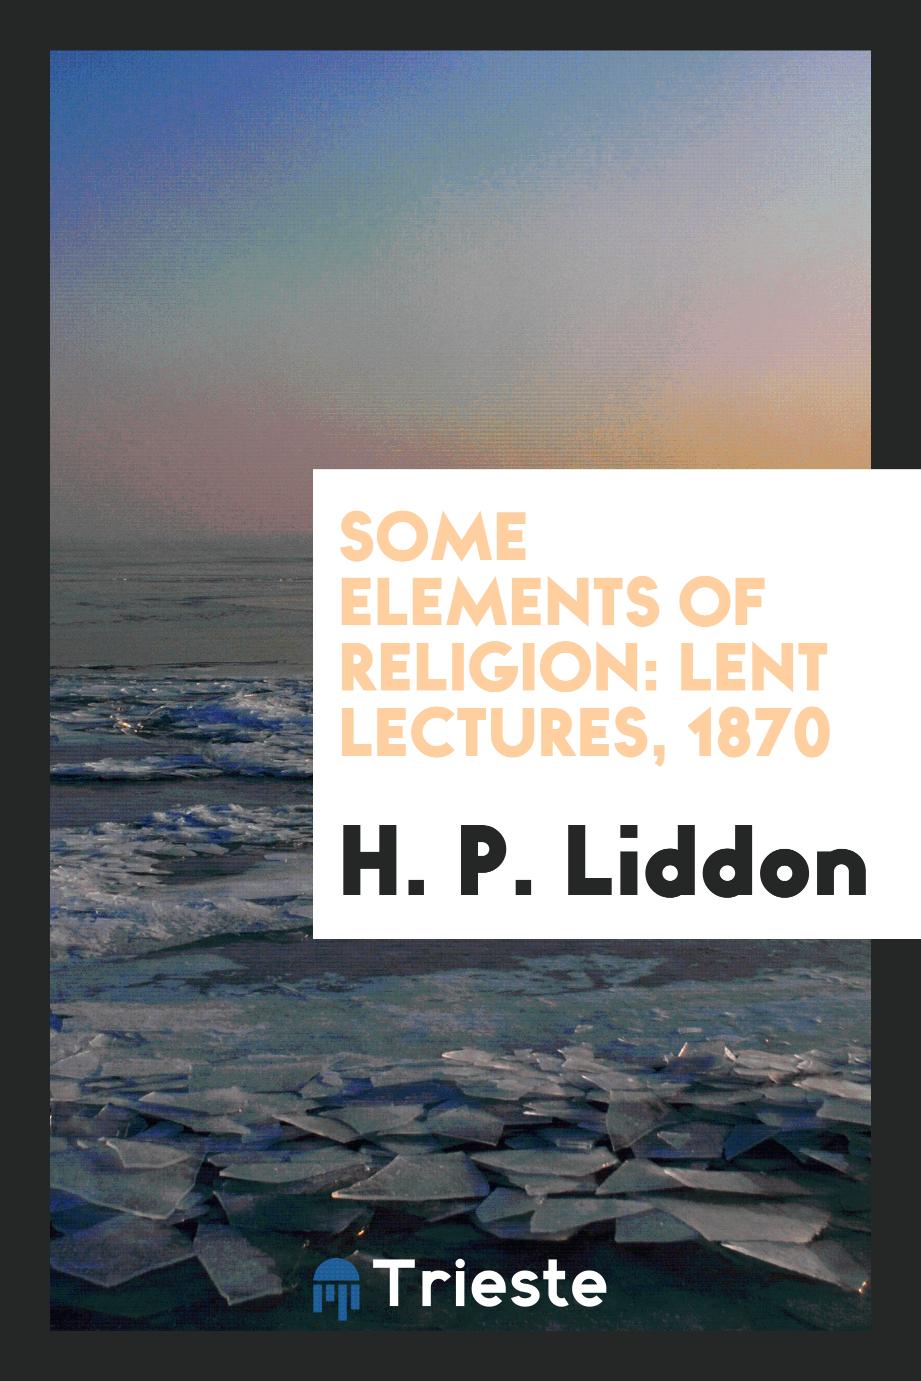 Some elements of religion: Lent lectures, 1870